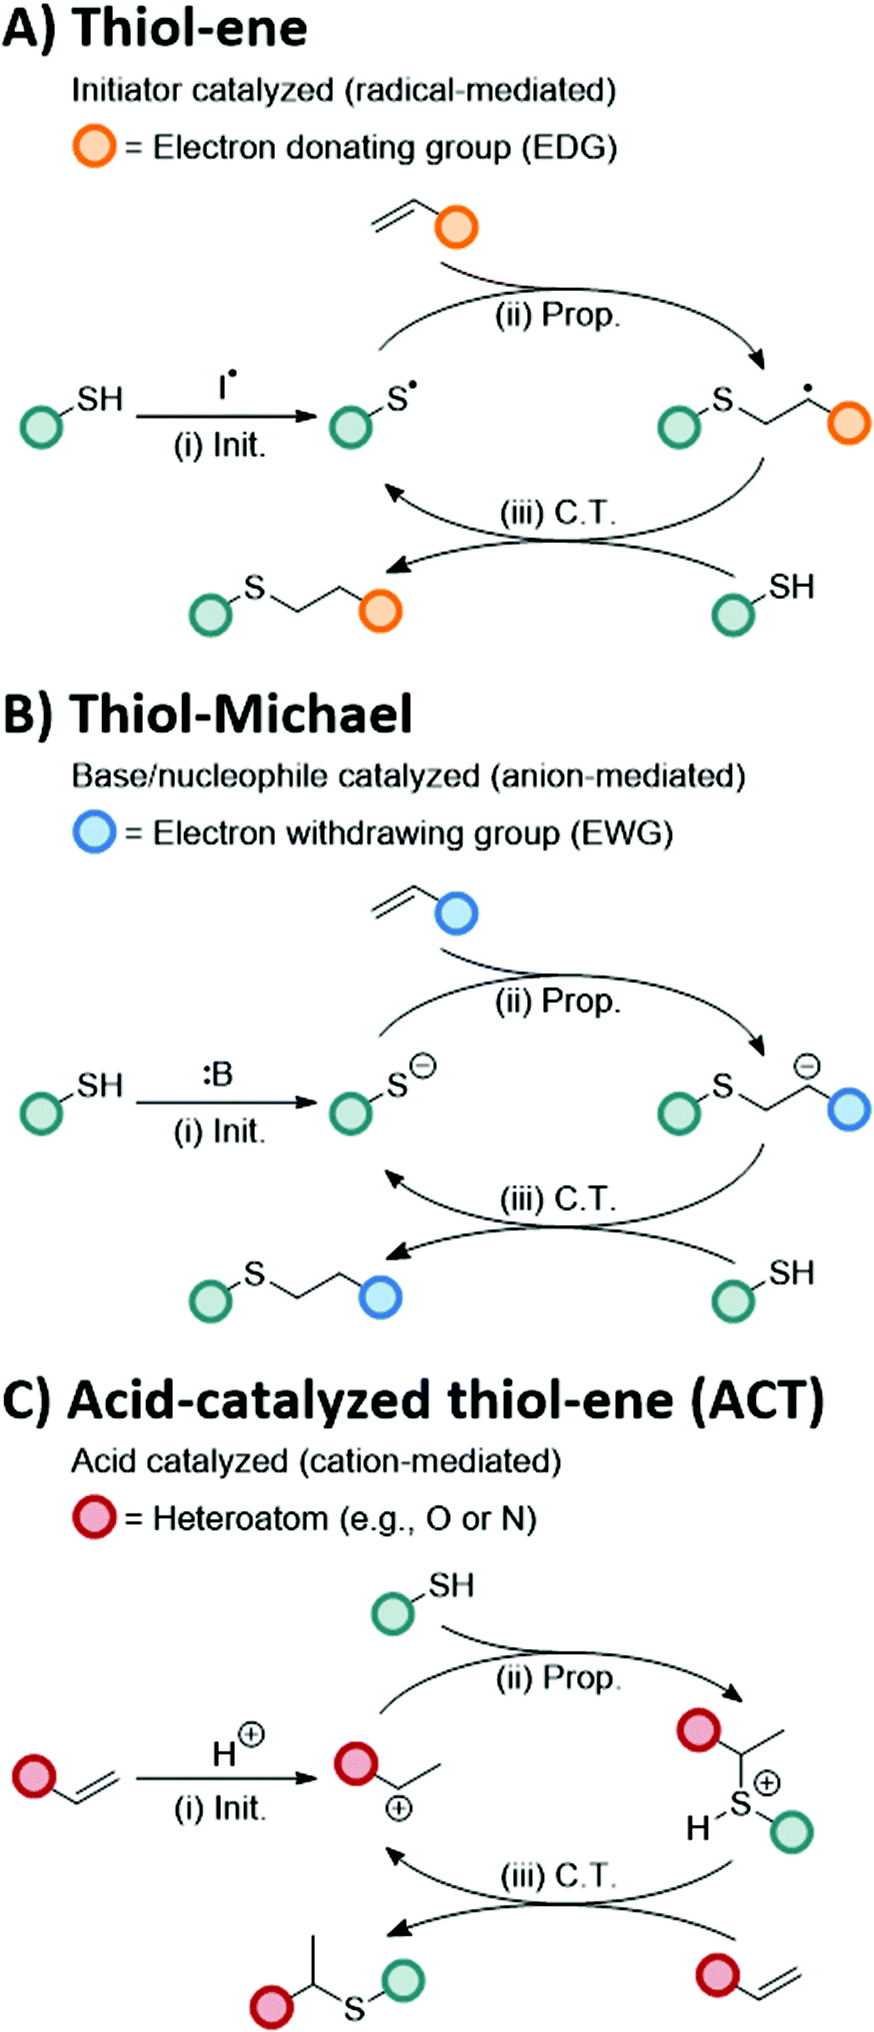 Expanding The Thiol X Toolbox Photoinitiation And Materials Application Of The Acid Catalyzed Thiol Ene Act Reaction Polymer Chemistry Rsc Publishing Doi 10 1039 D0pyh